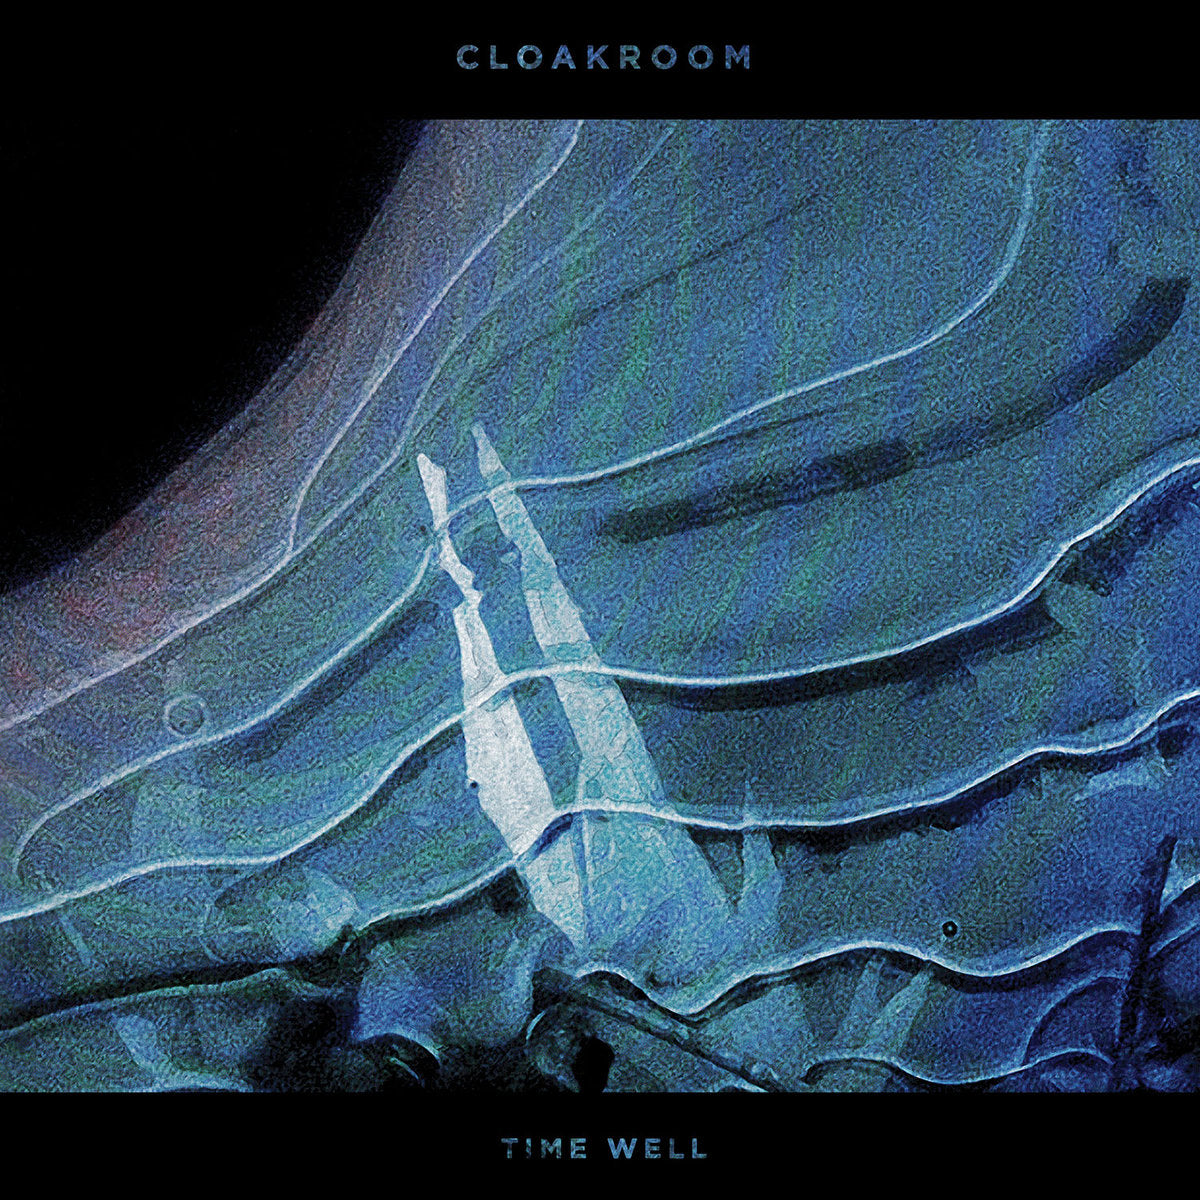 CLOAKROOM "Time Well" 2xLP